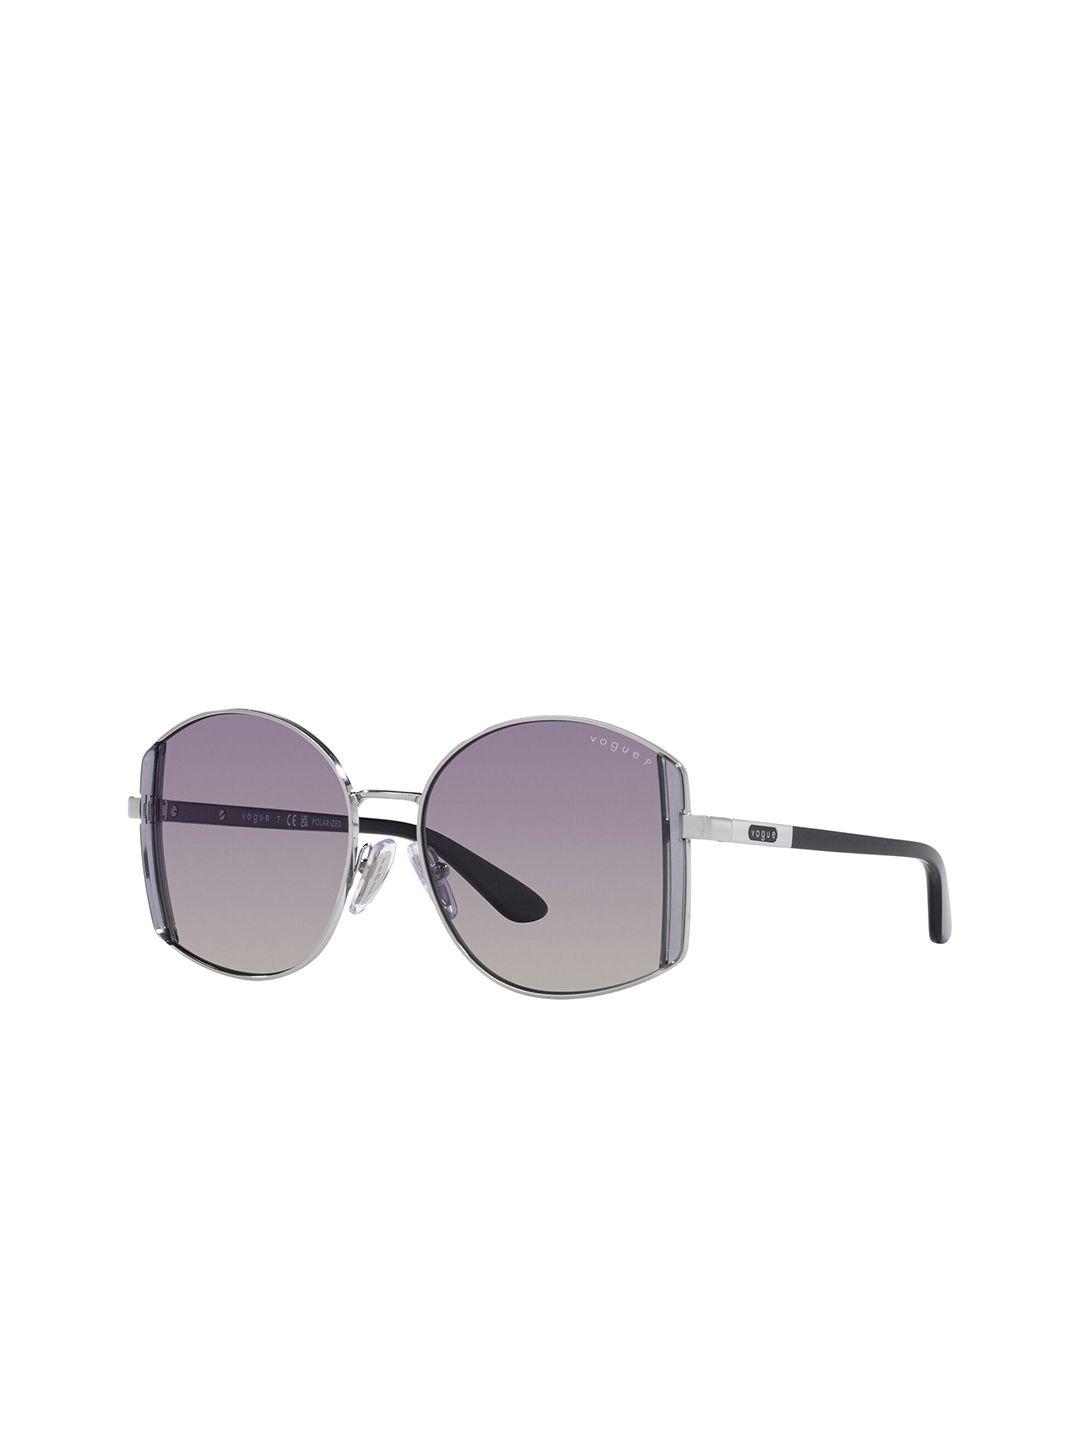 vogue women lens & oversized sunglasses with uv protected lens 8056597815642